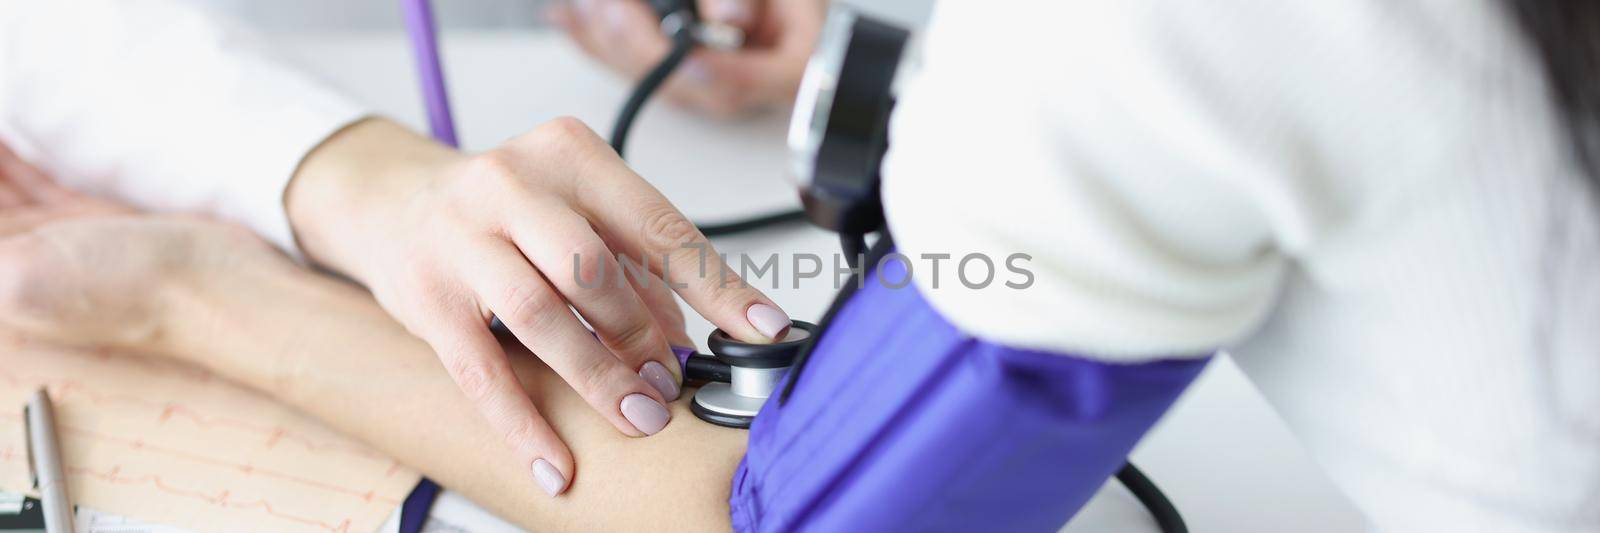 Practitioner taking blood pressure of woman by kuprevich